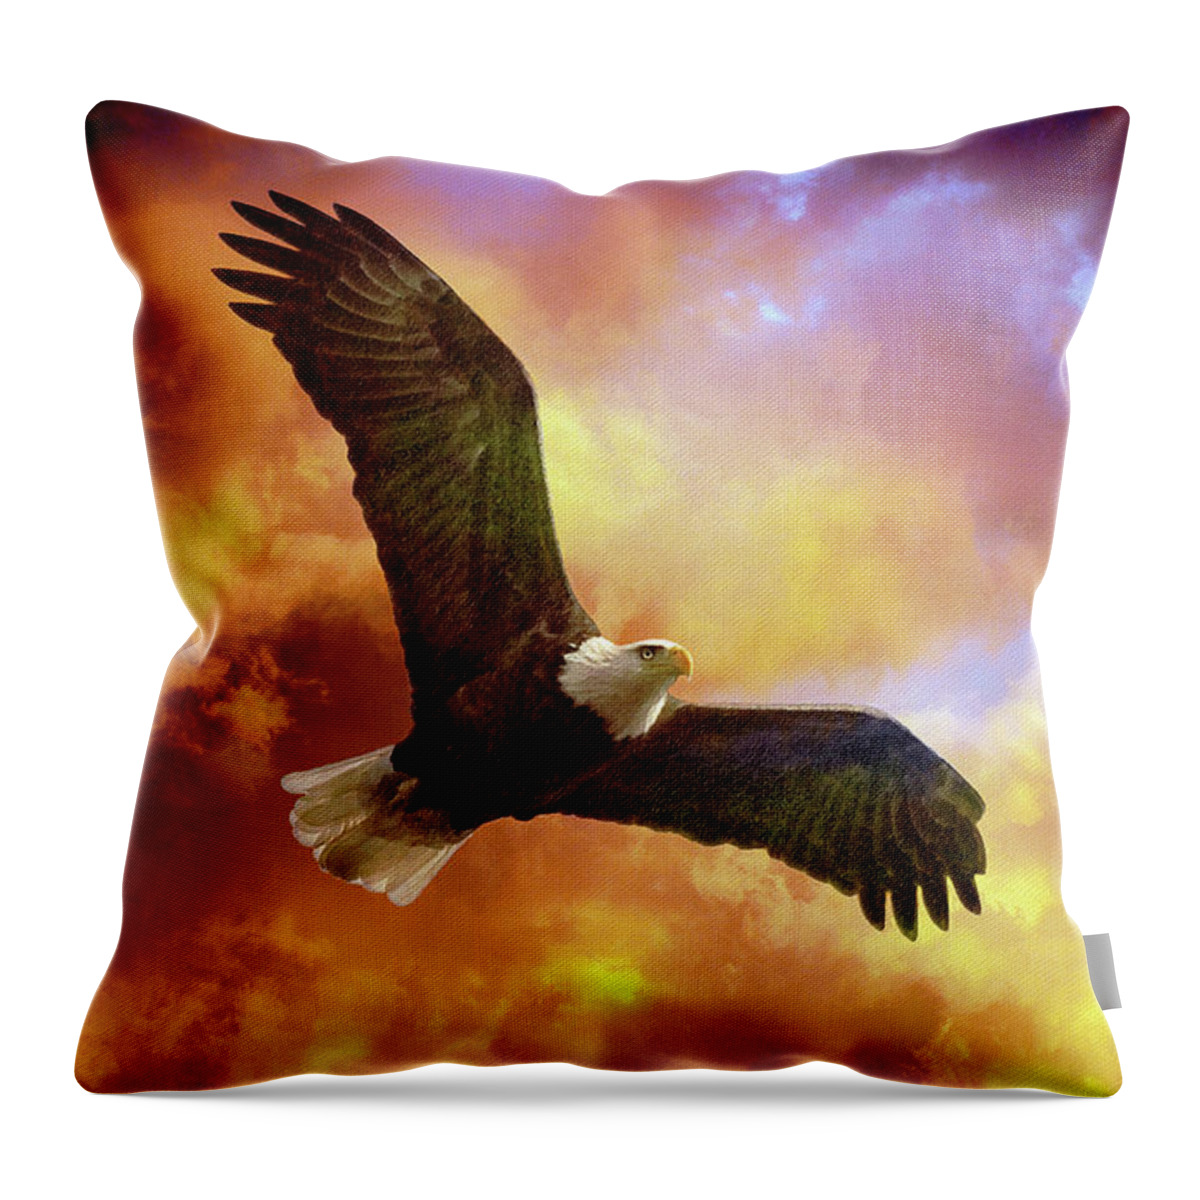 Eagle Throw Pillow featuring the photograph Perseverance by Lois Bryan